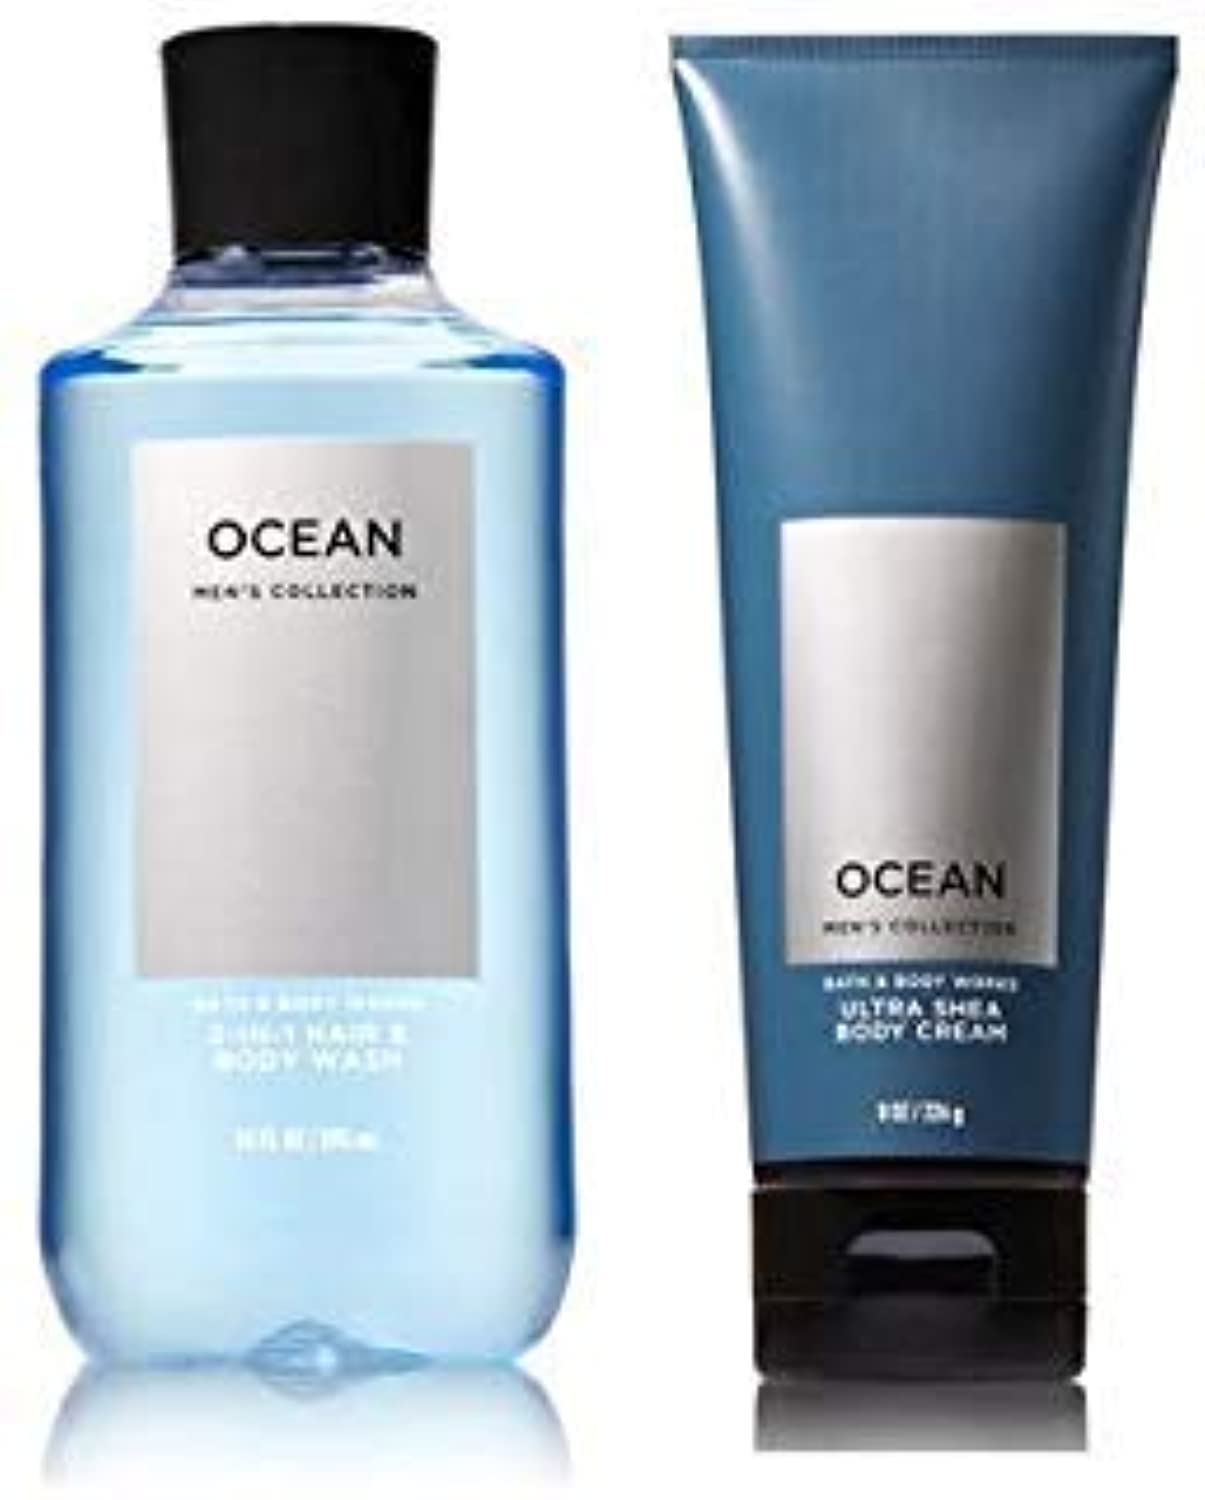 Bath & Body Works Men's Collection Ultra Shea Body Cream & 2 in 1 Hair and Body Wash OCEAN.